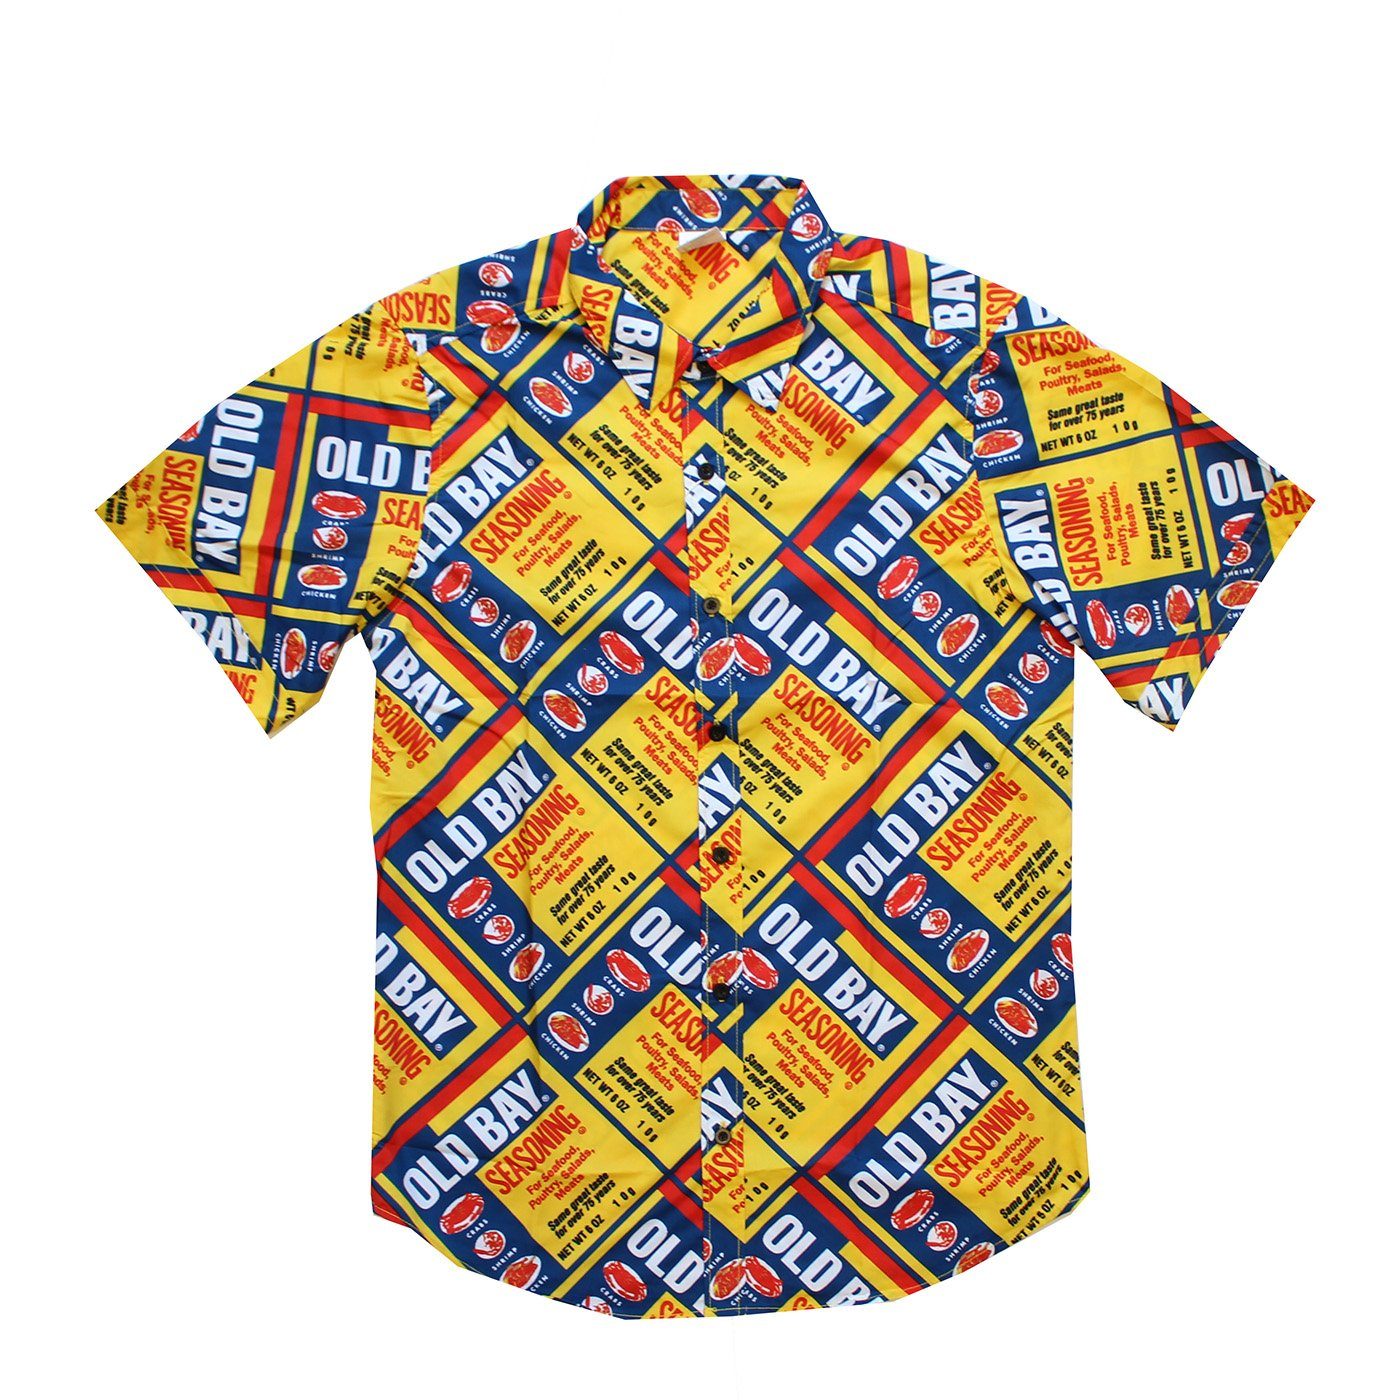 Flat Old Bay Can Pattern / Hawaiian Shirt - Route One Apparel